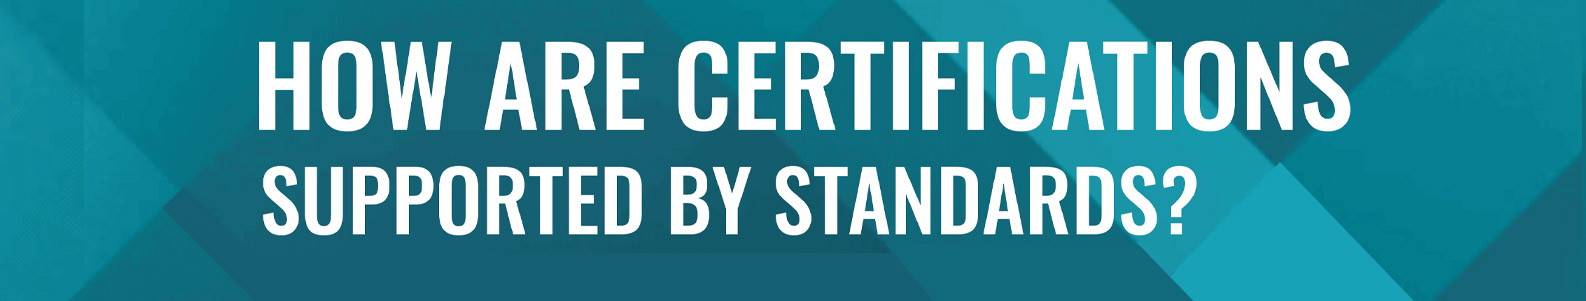 Workcred Releases Four-Part Video Series on the Importance of Standardization to Certifications